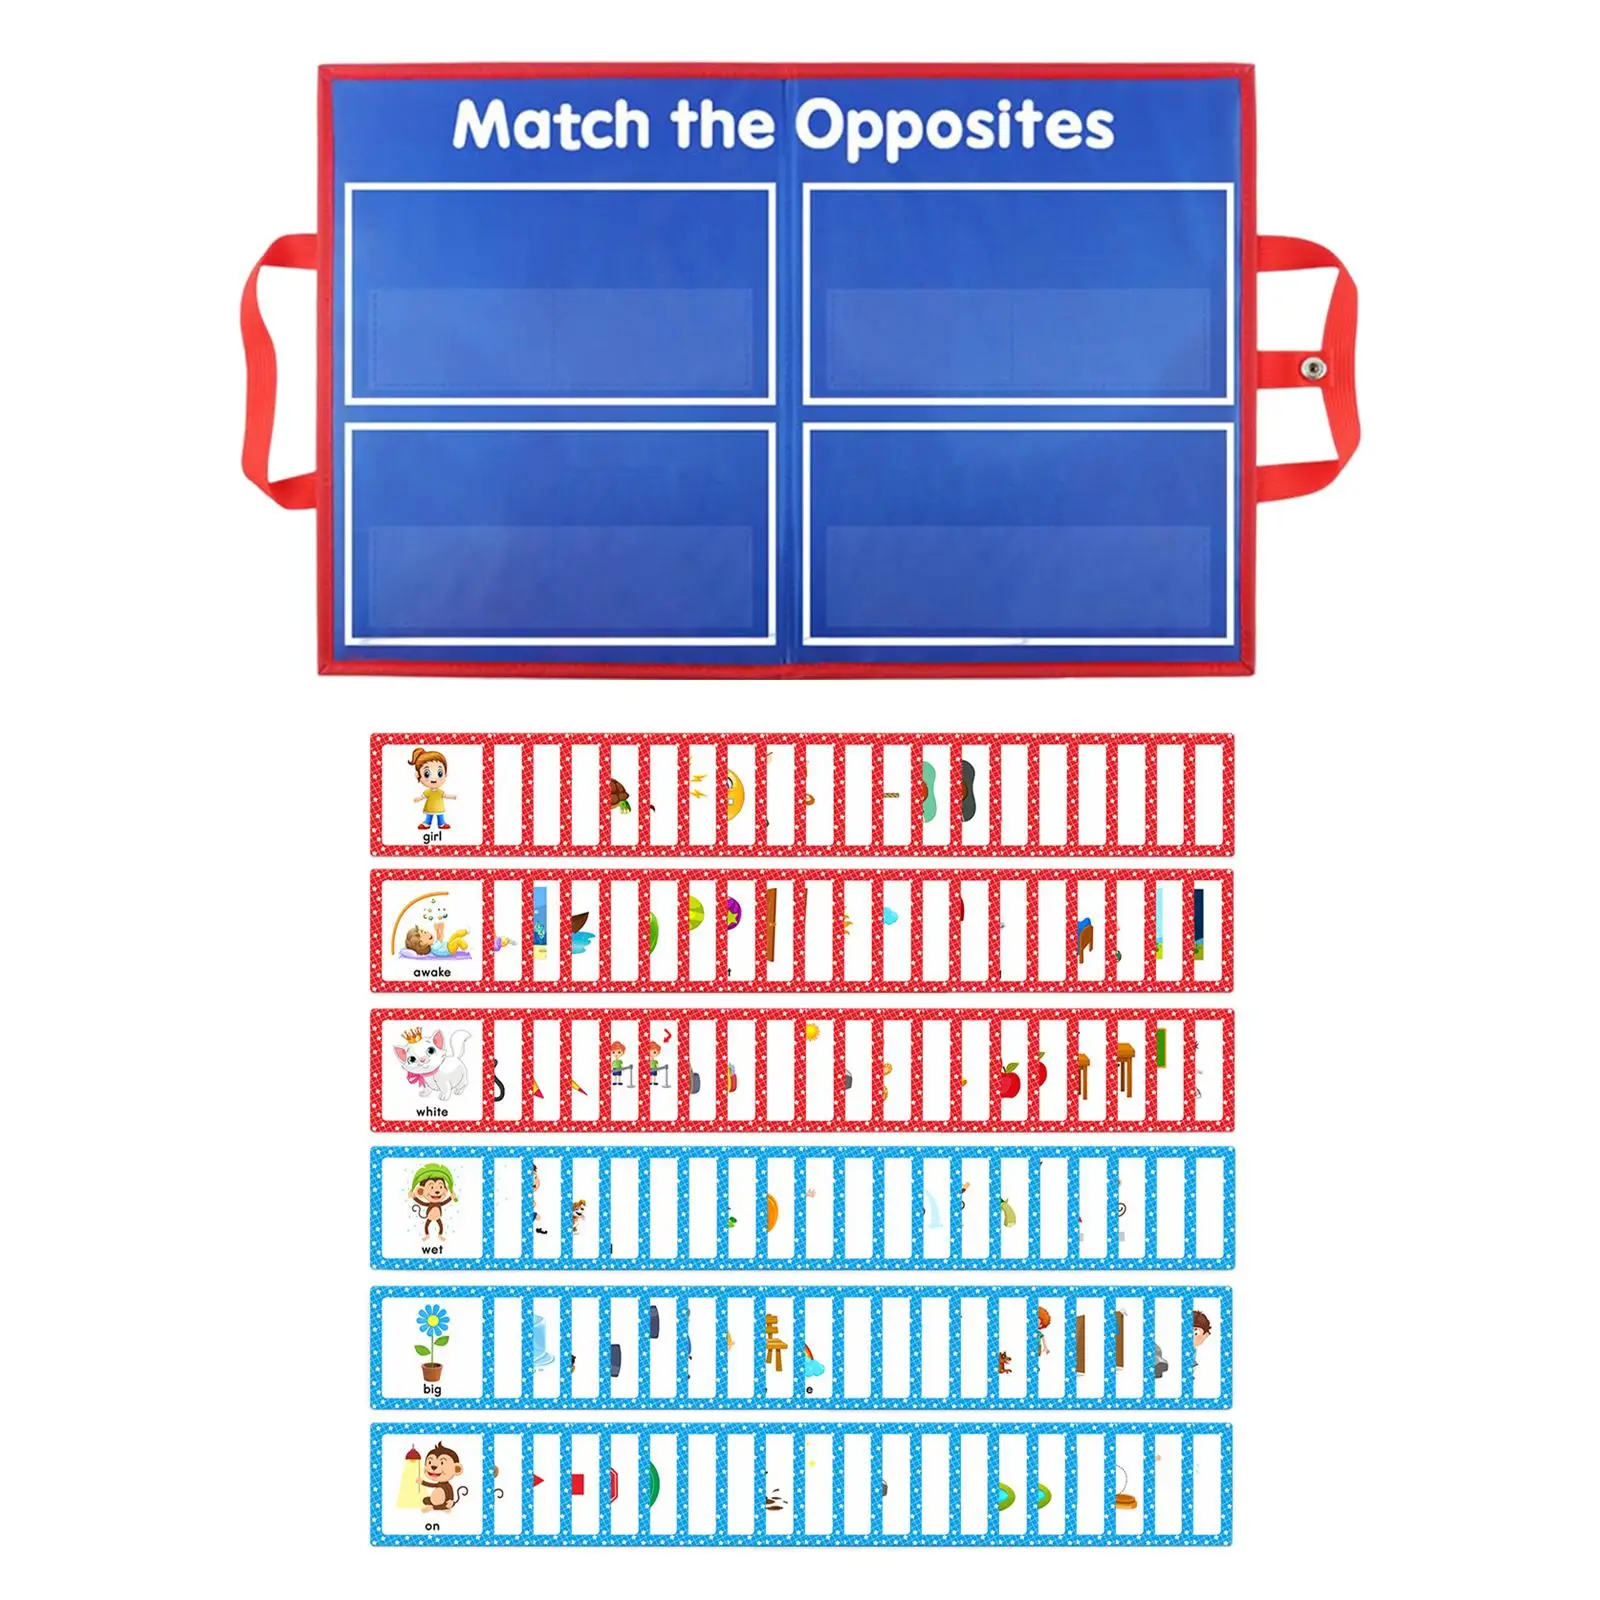 Opposites English Word Card Learning Toy Educational Toys Flashcards Cognitive Matching Puzzle Game for Classroom Kindergarten